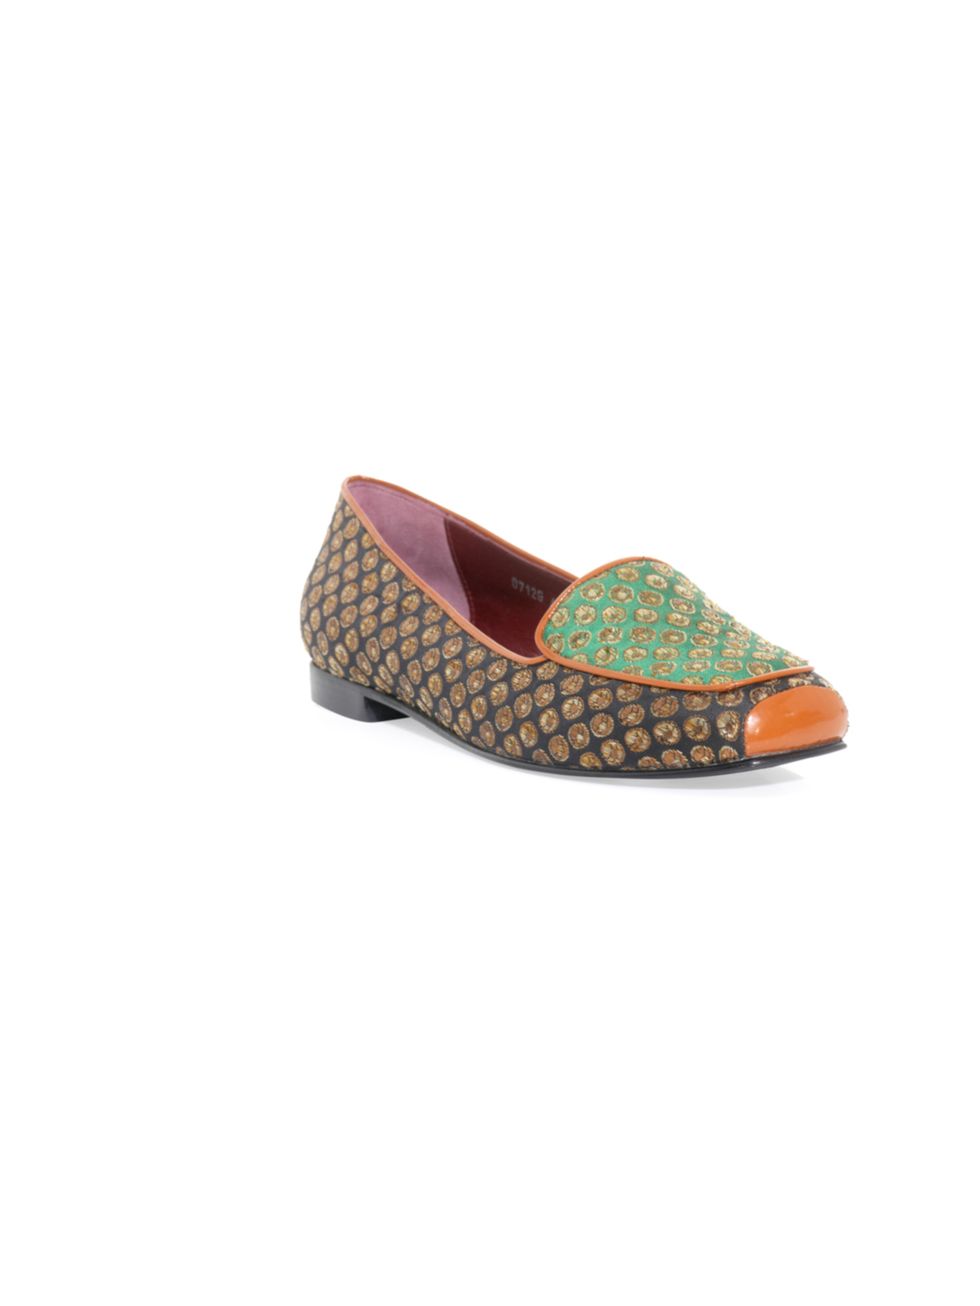 <p>In case you missed the memo, its all about flats right now. And the fancier the better. Team with cigarette pants, jeans or leather shorts for a style statement with the comfort factor Opening Ceremont brocade slippers, £186, at Matches</p><p><a href